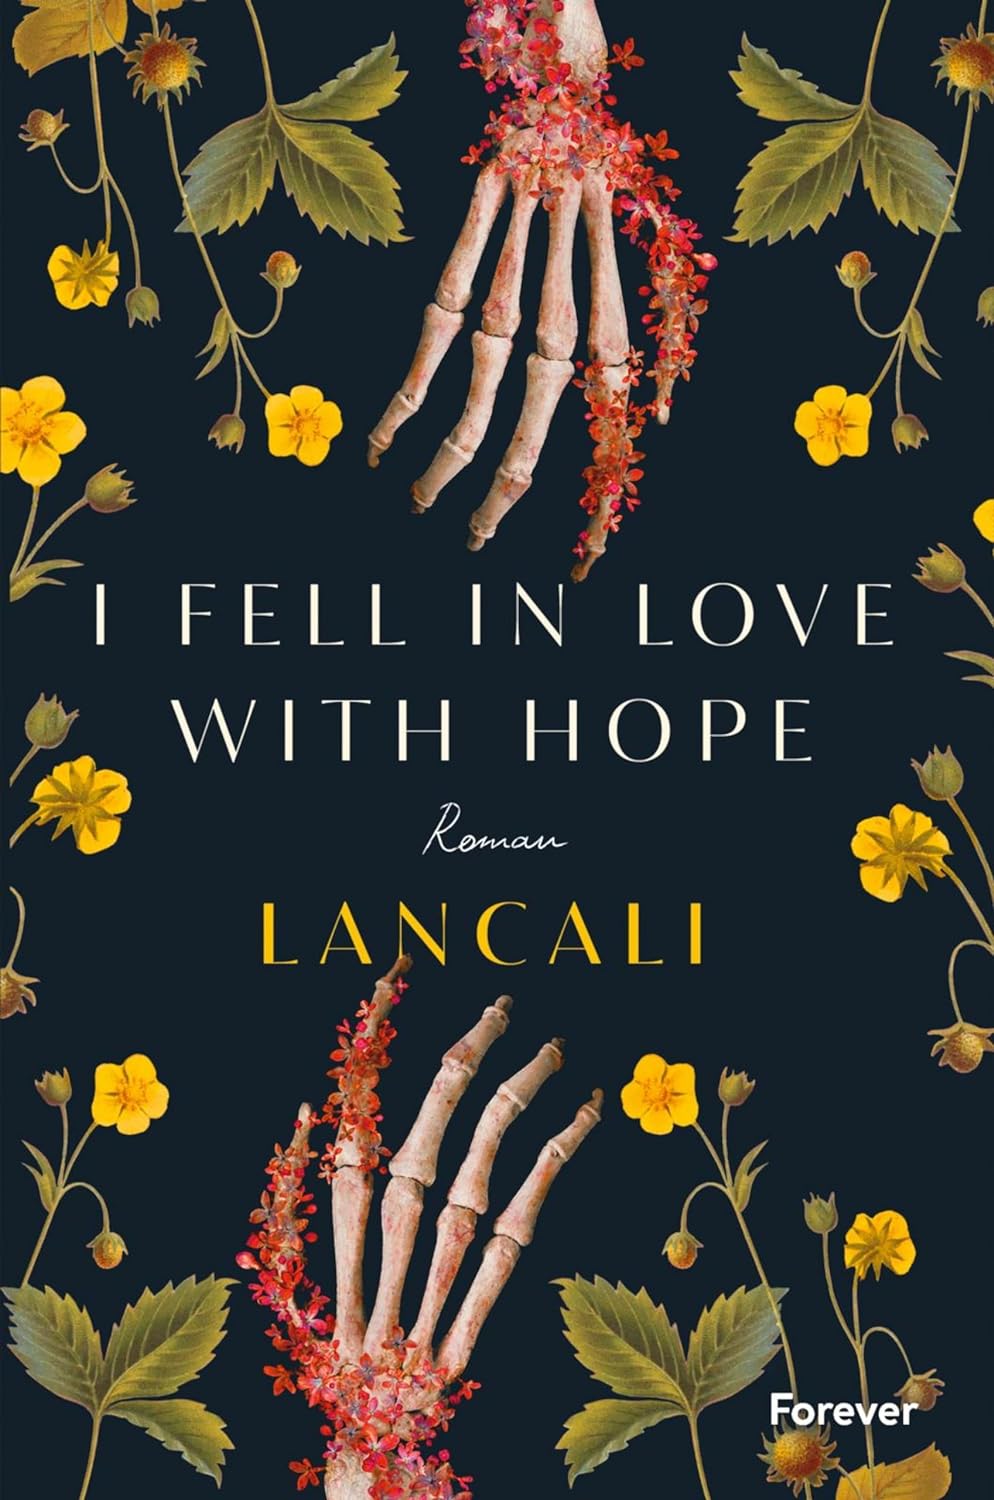 Lancali - i fell in love with hope